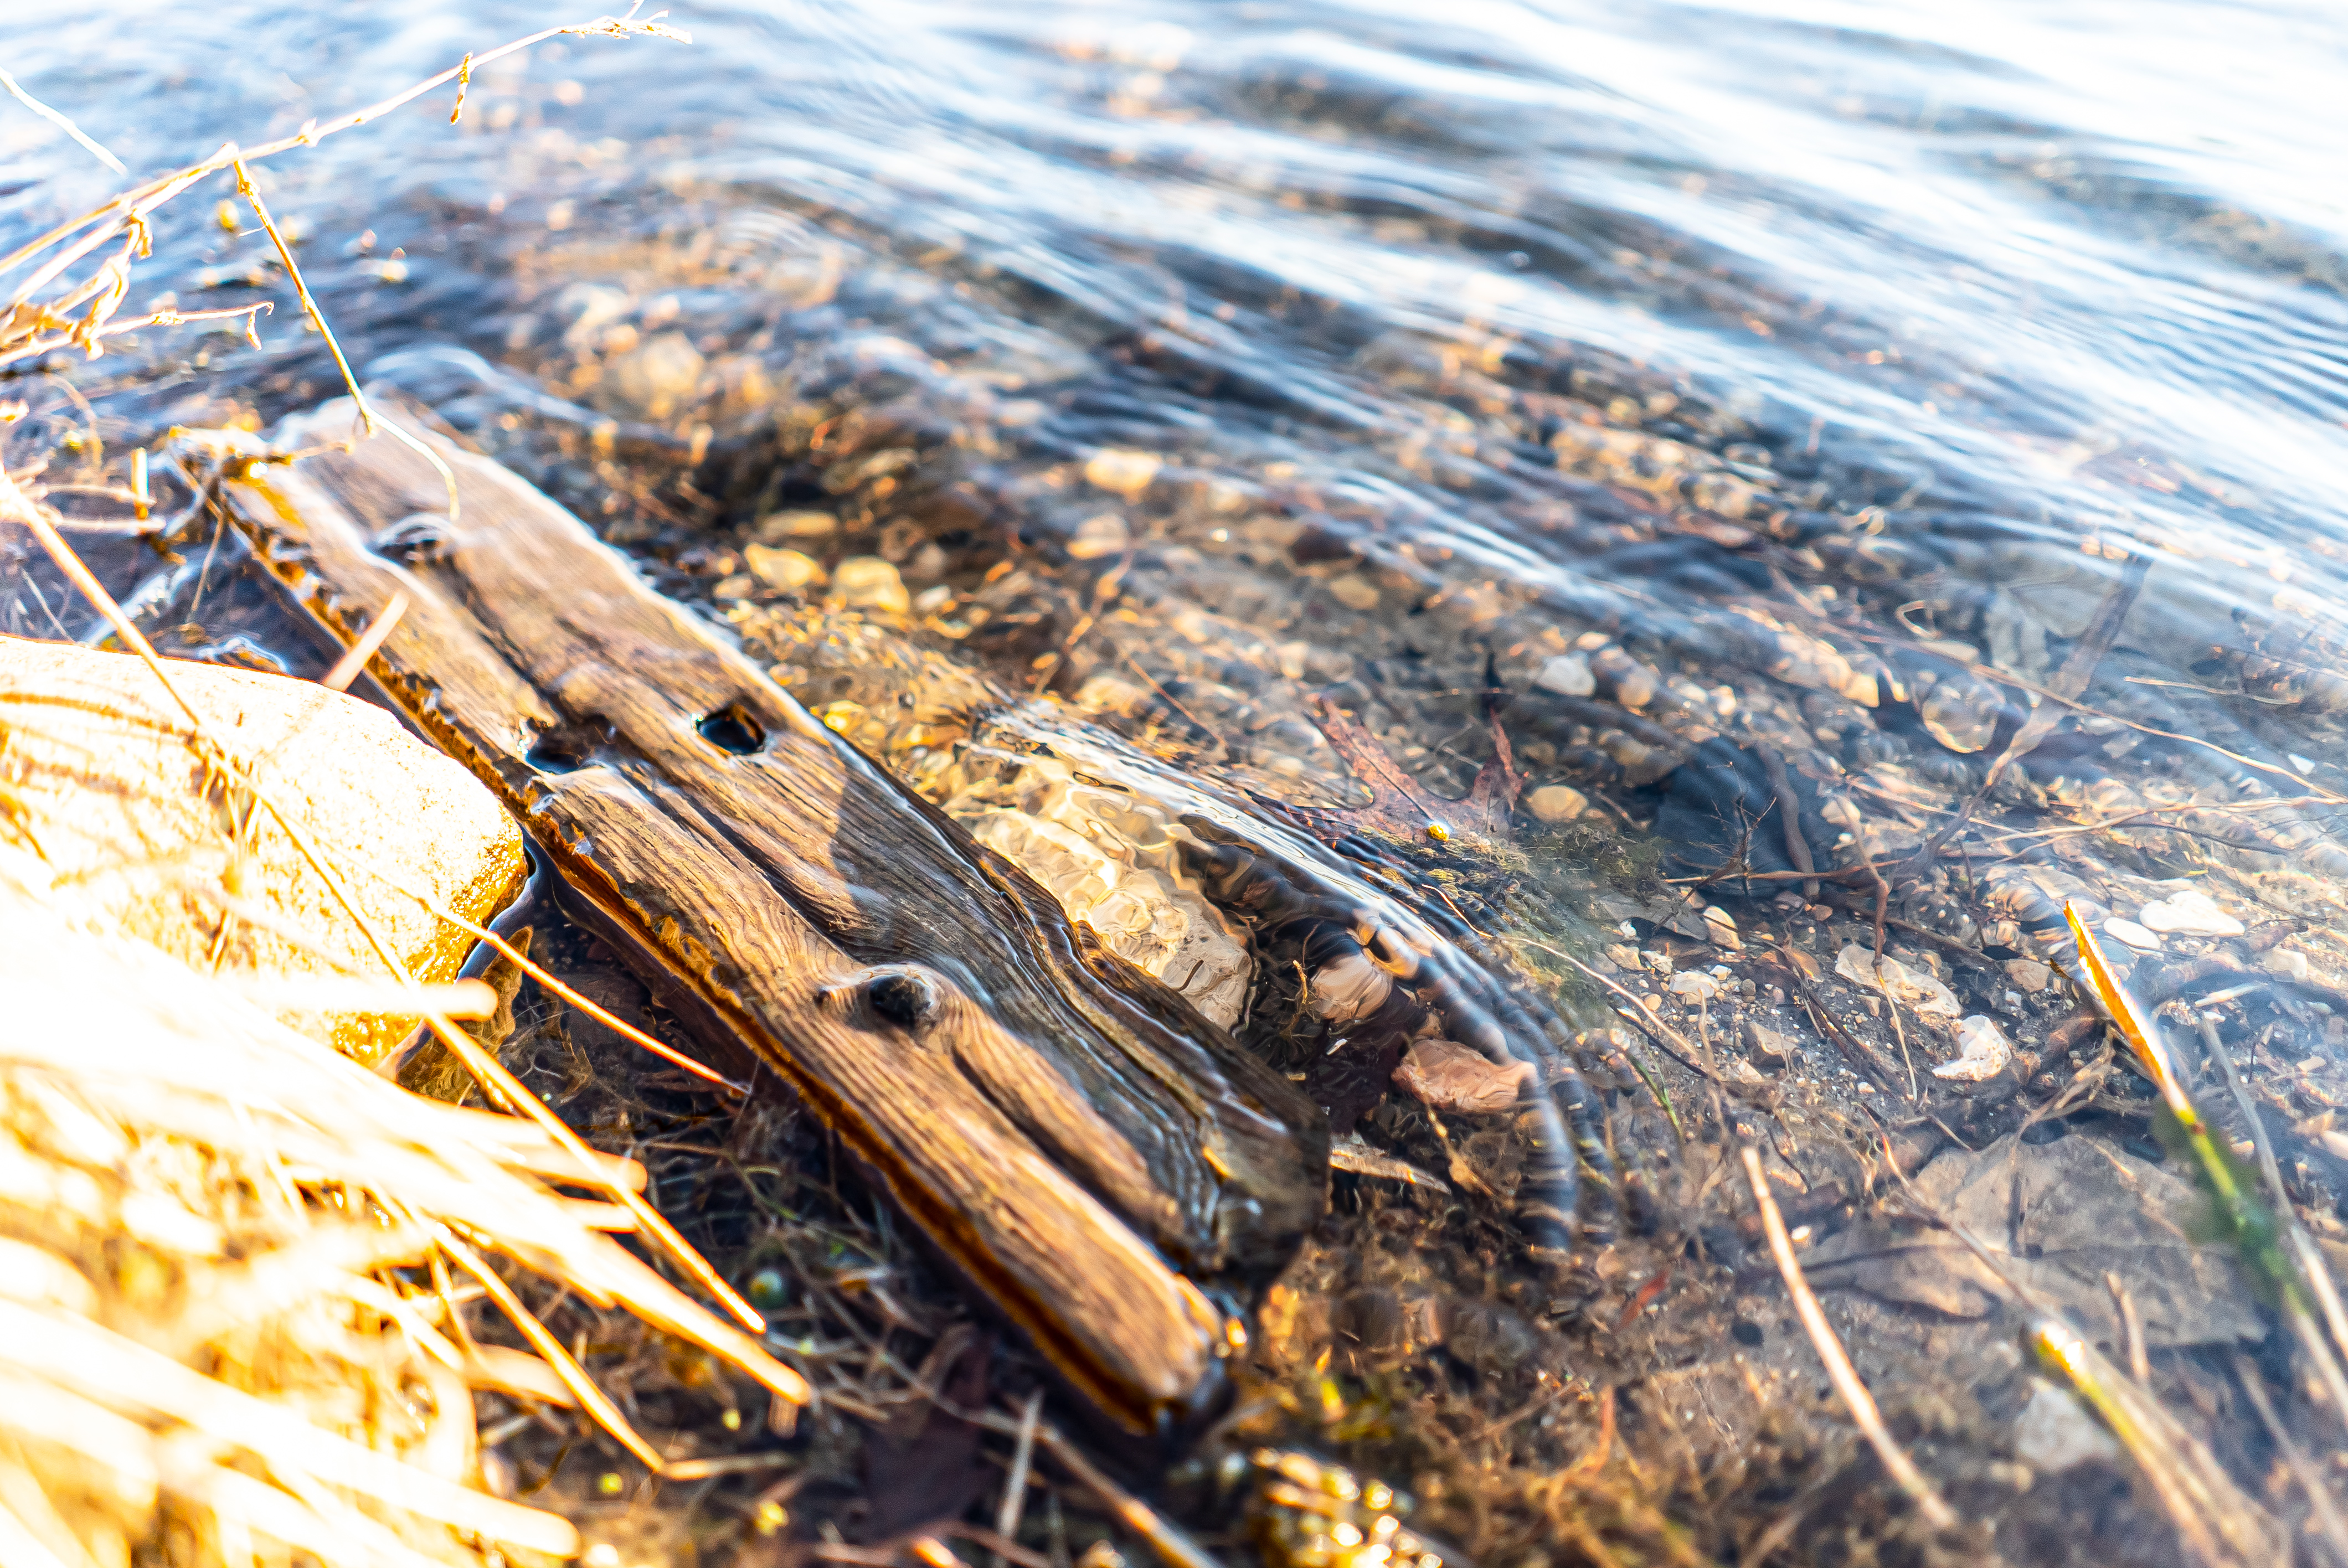 Gallery: Driftwood by the Lake